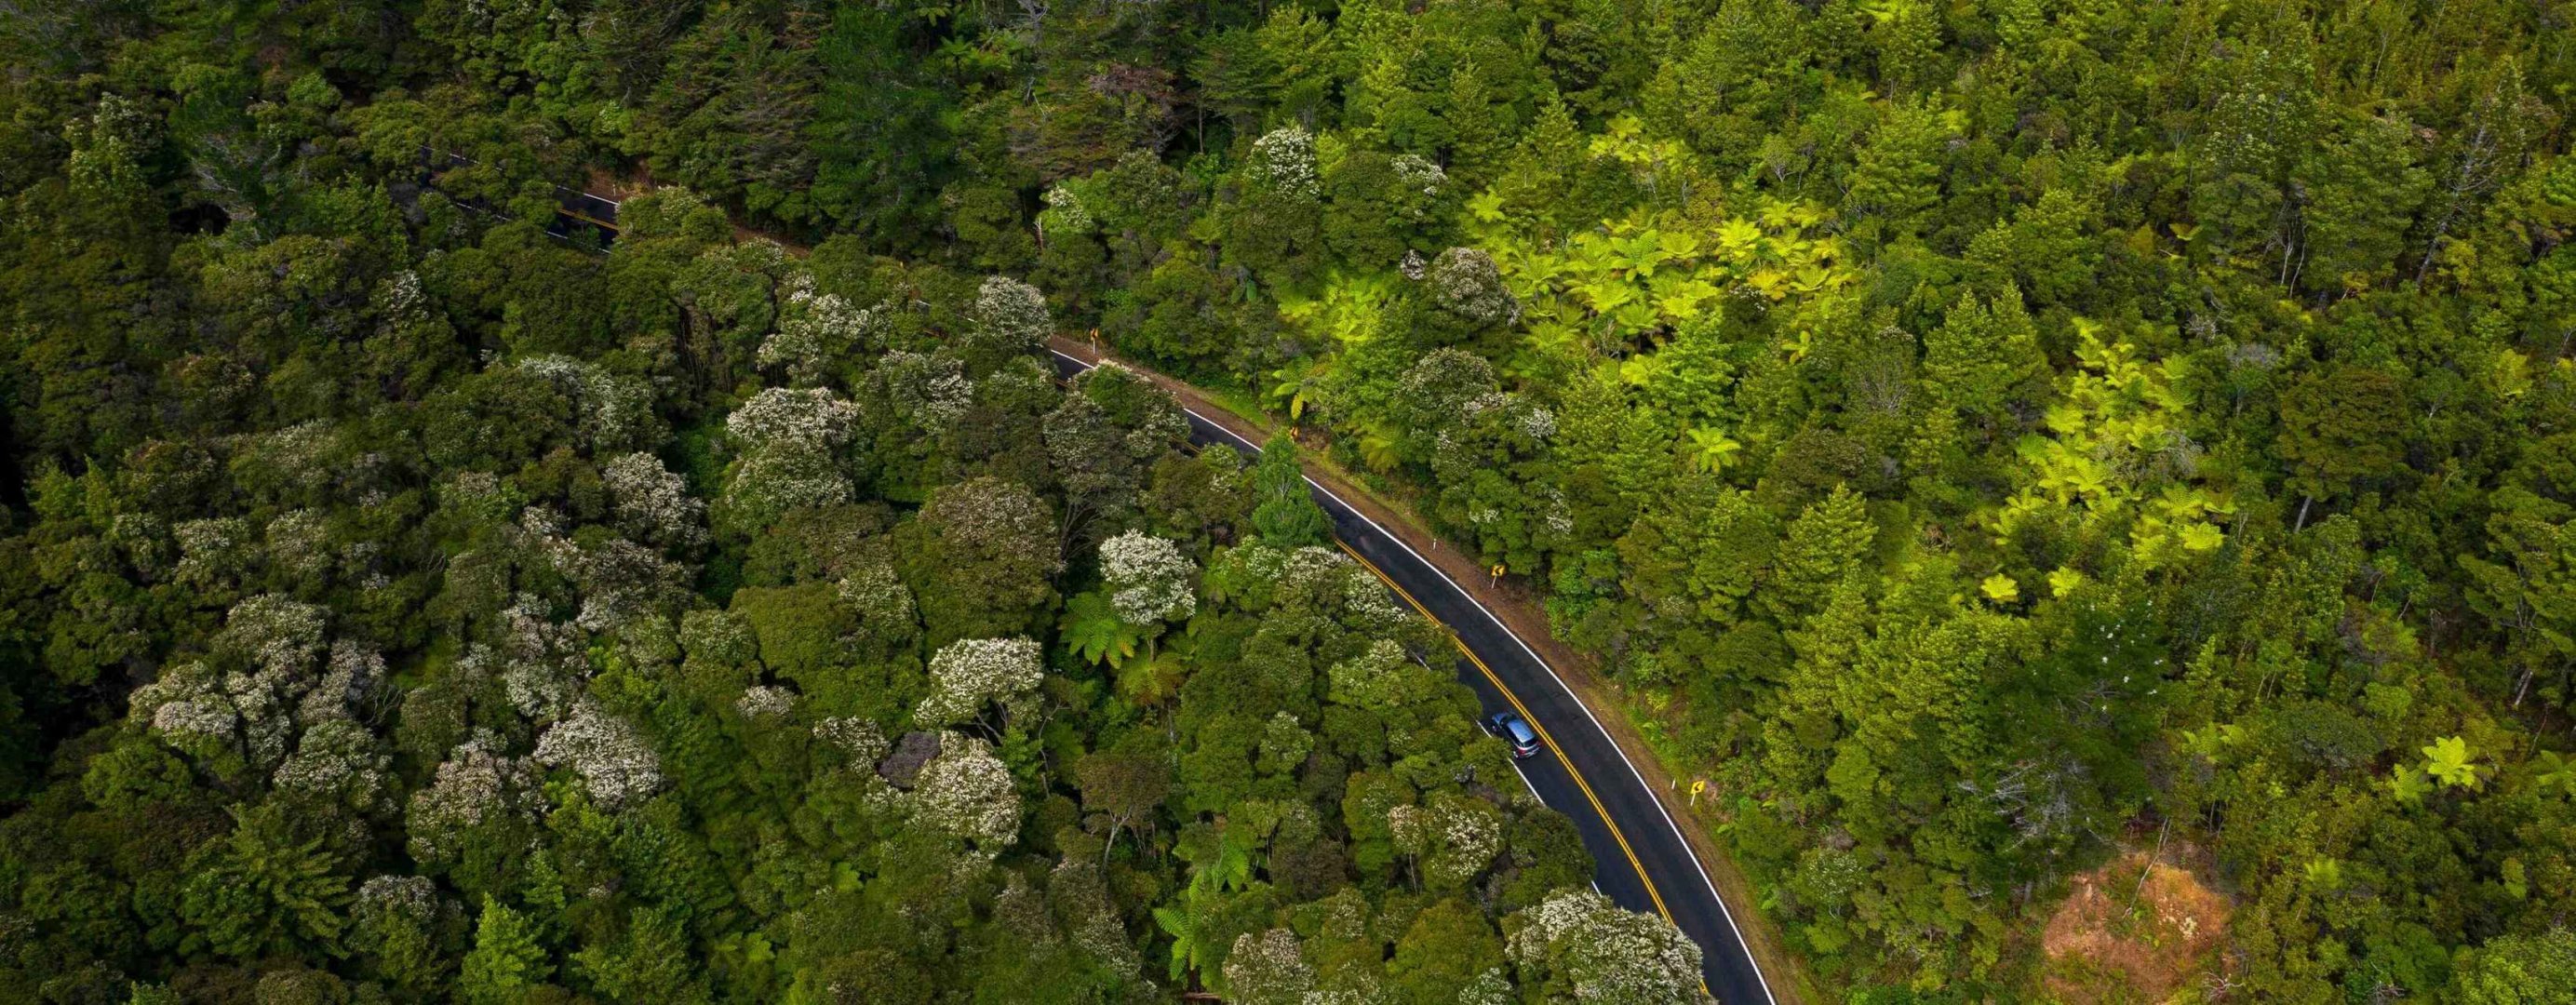 Drone image of car driving in forest.jpg